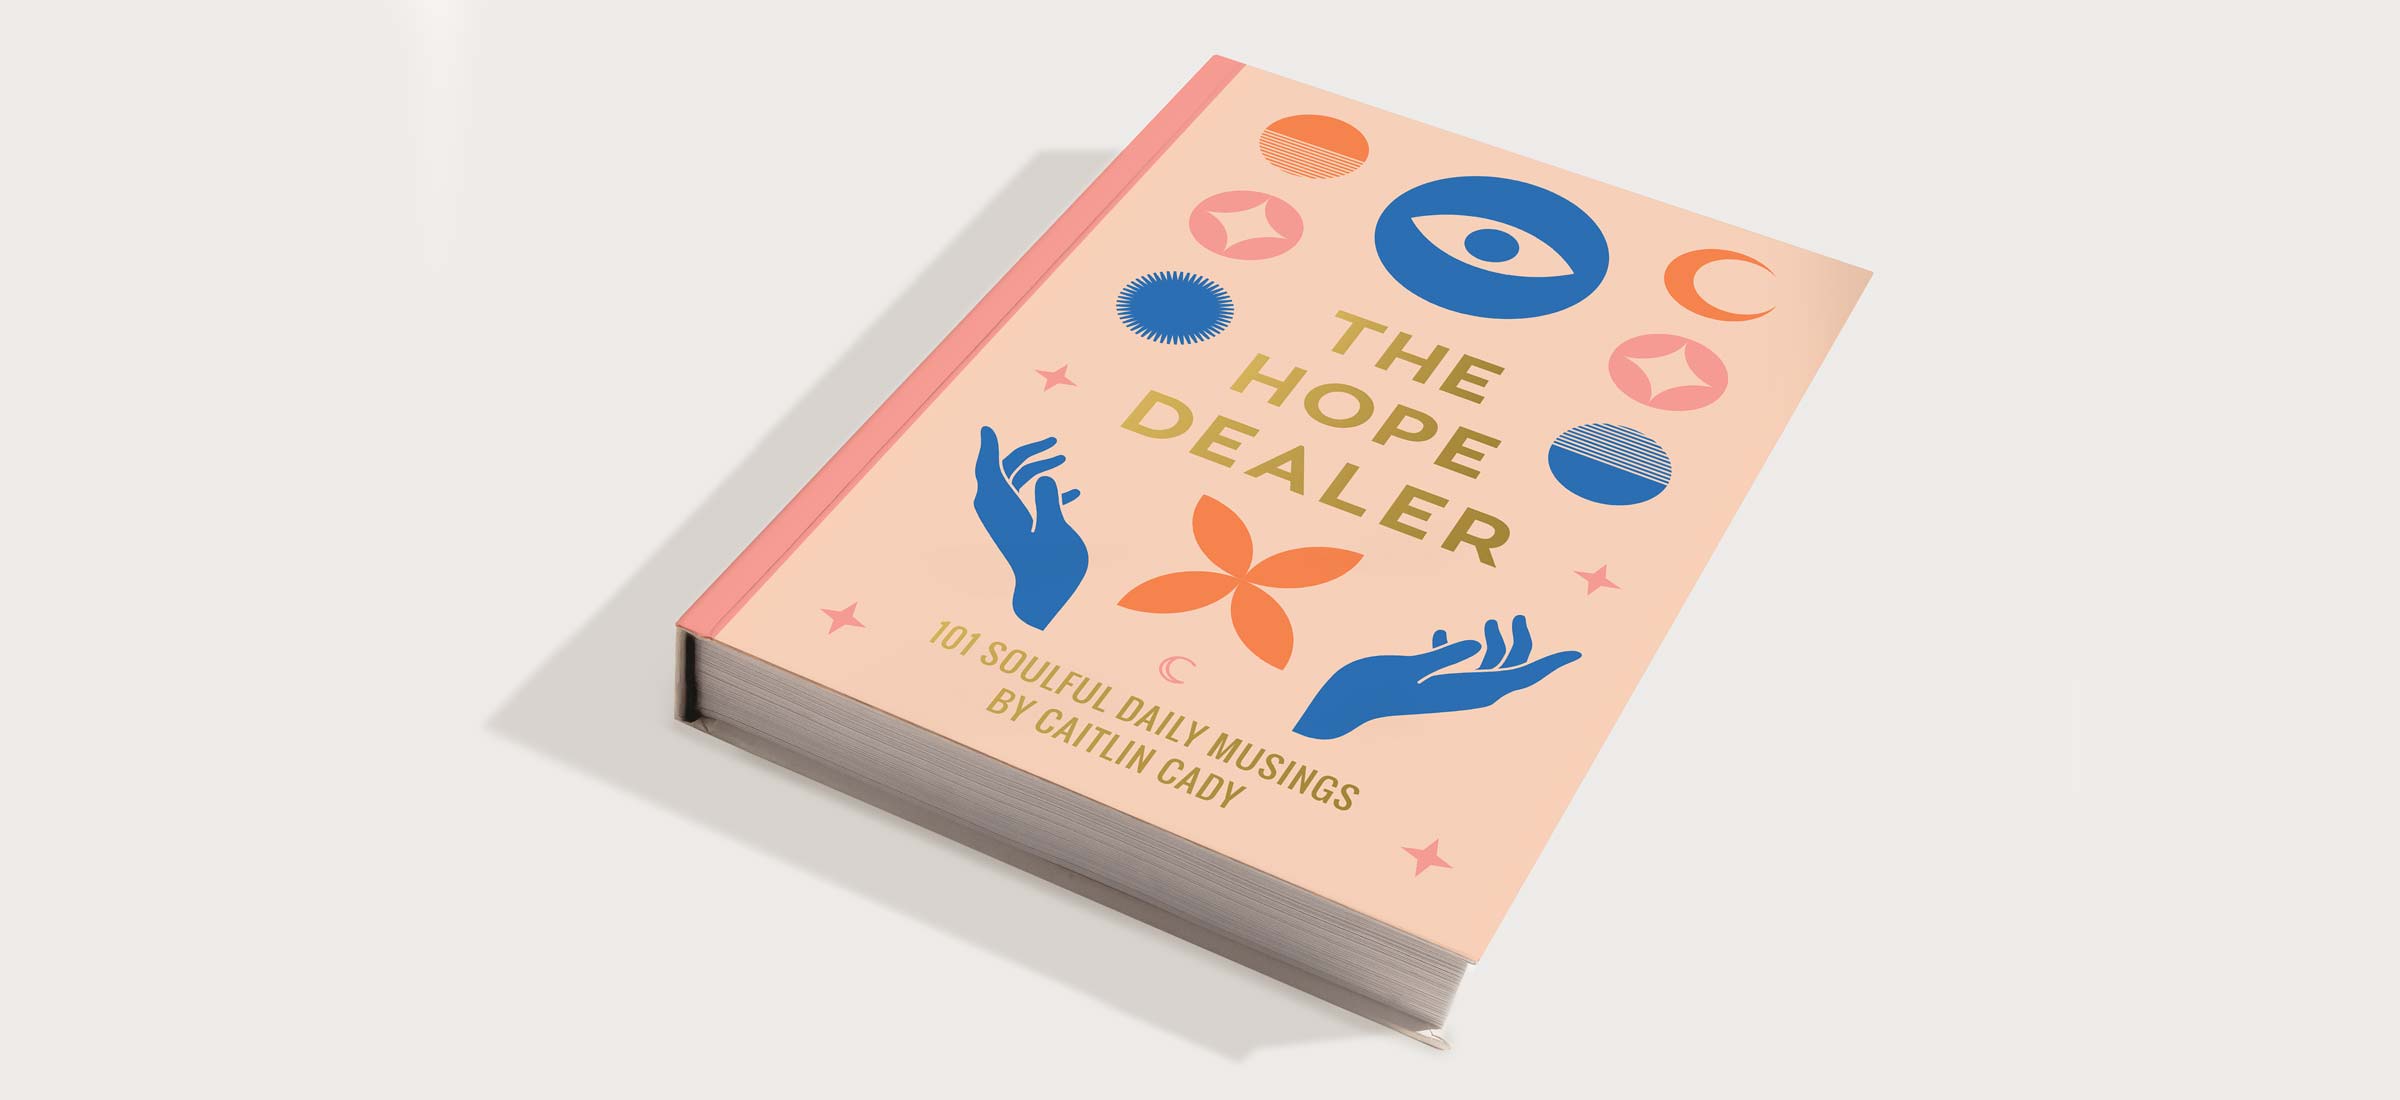 The Hope Dealer, The Book